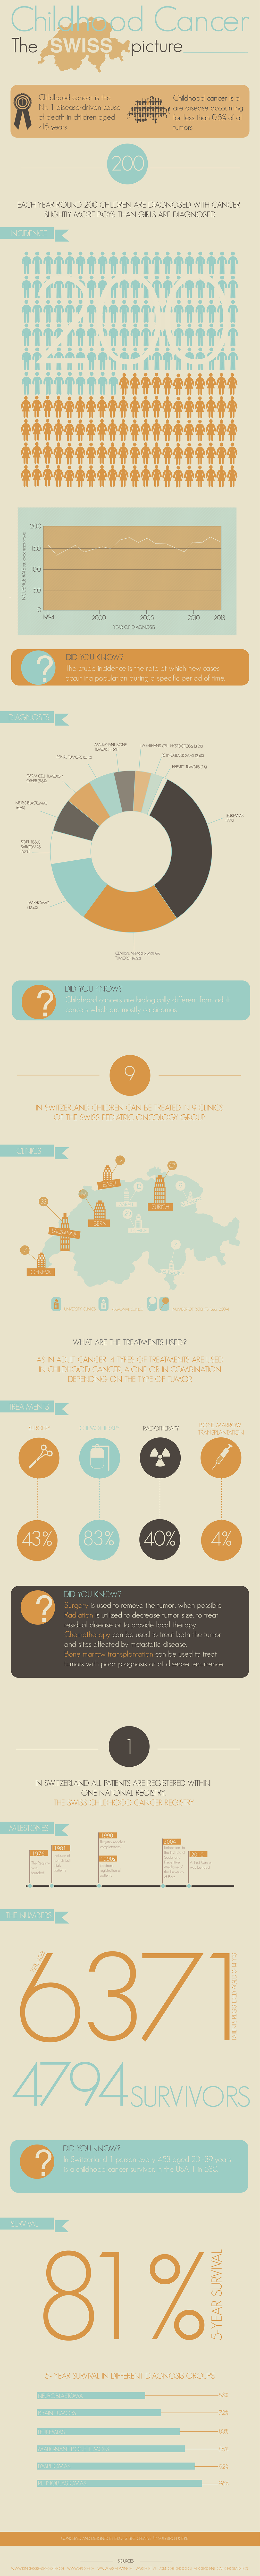 cancer infographic childhood cancer